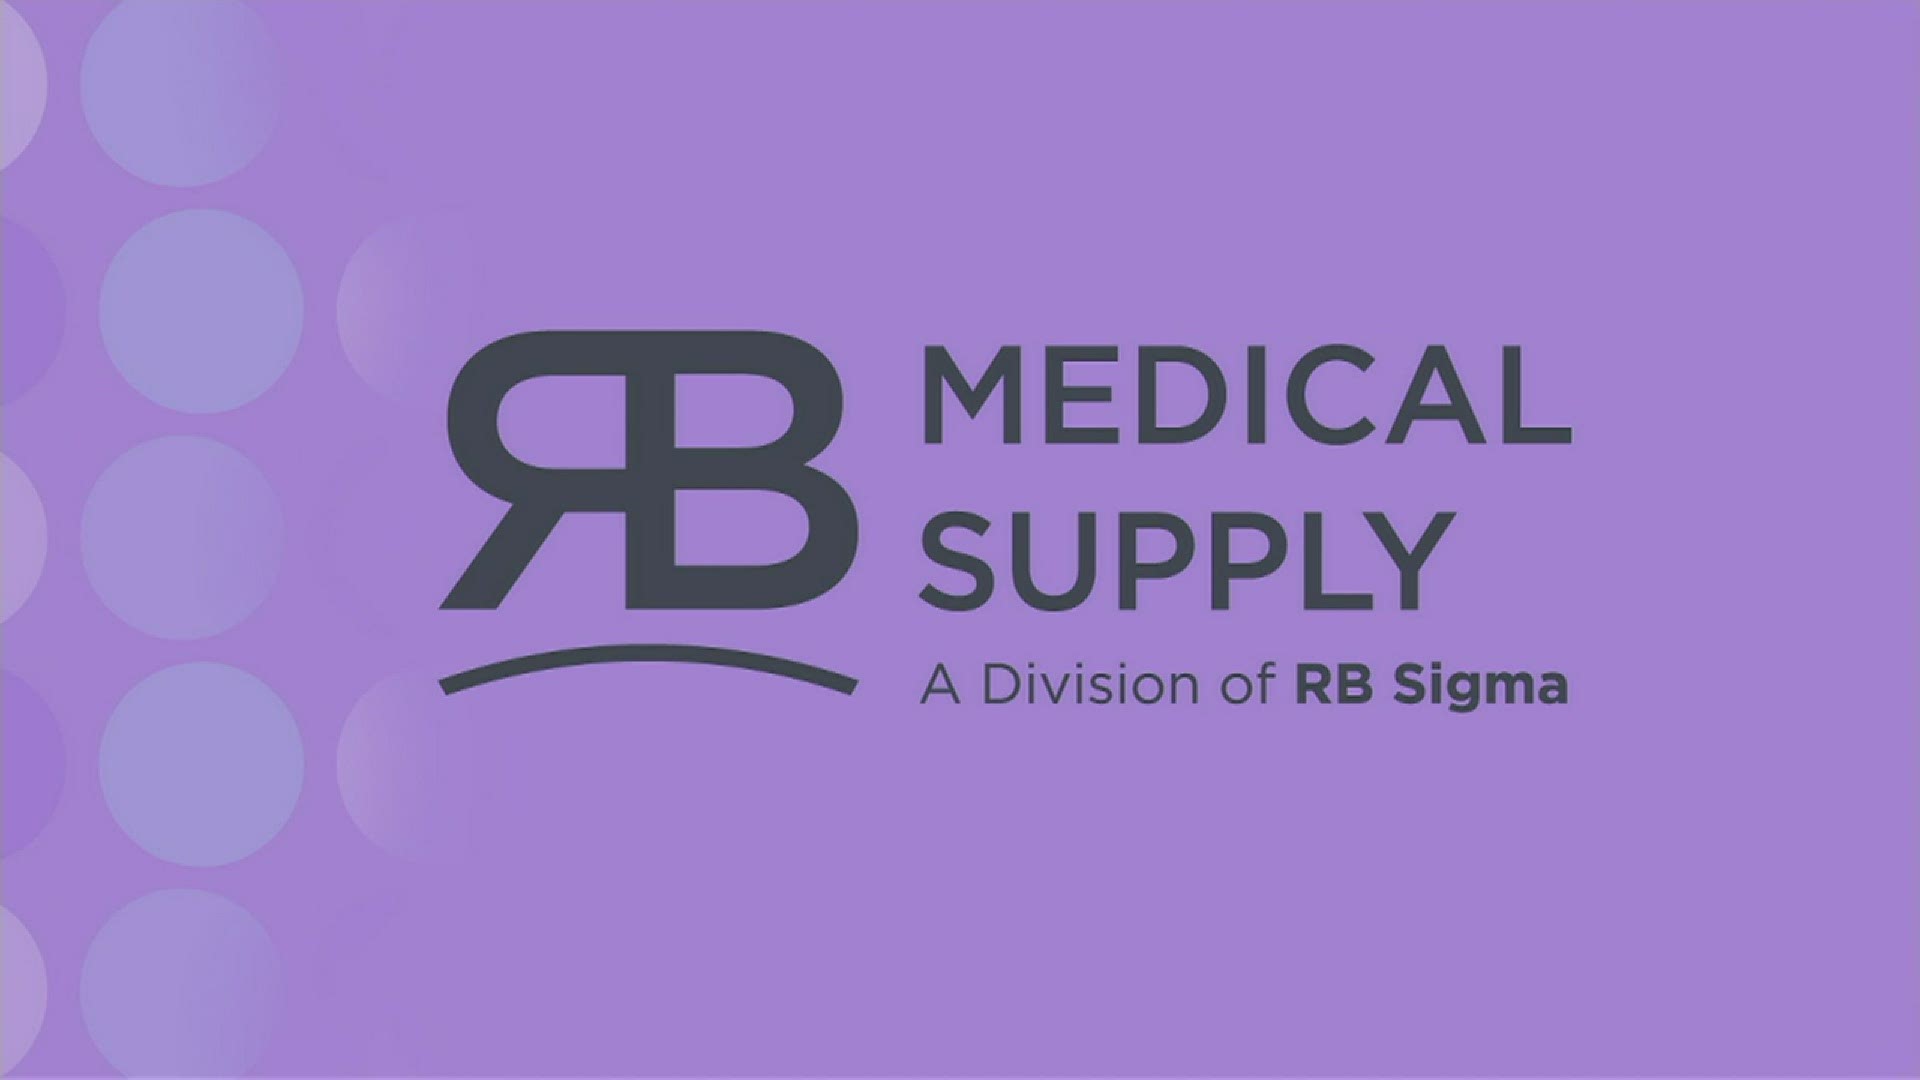 Nathan Ingrao is here to talk with Alexa about brand new company RB Medical Supply and the important role they have played during this pandemic.